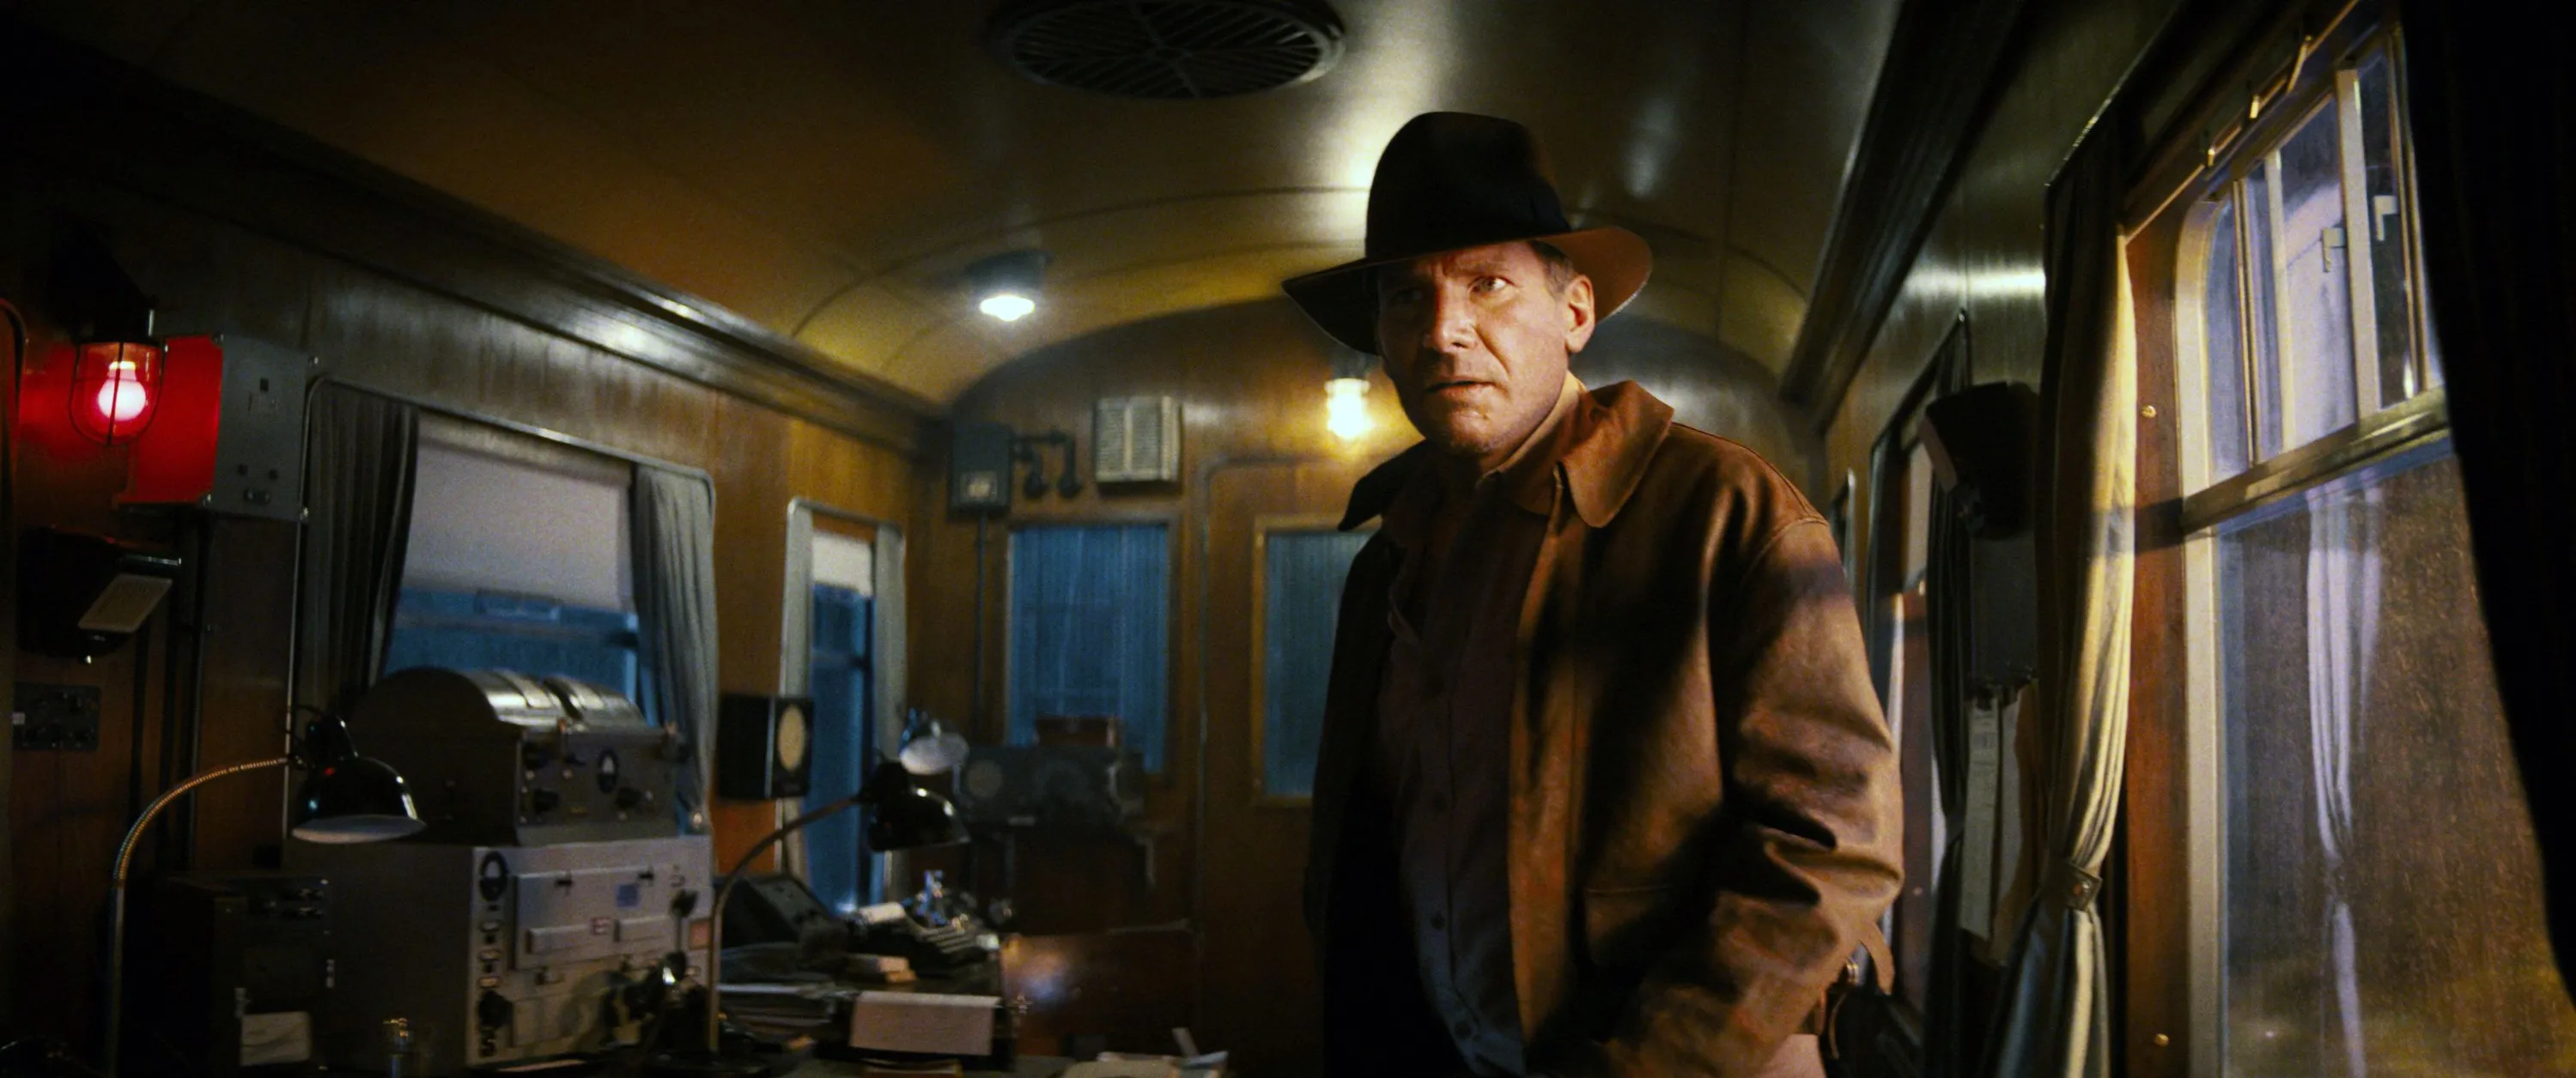 Digitally de-aged Indiana Jones, played by Harrison Ford, in a train car in Indiana Jones and the Dial of Destiny.